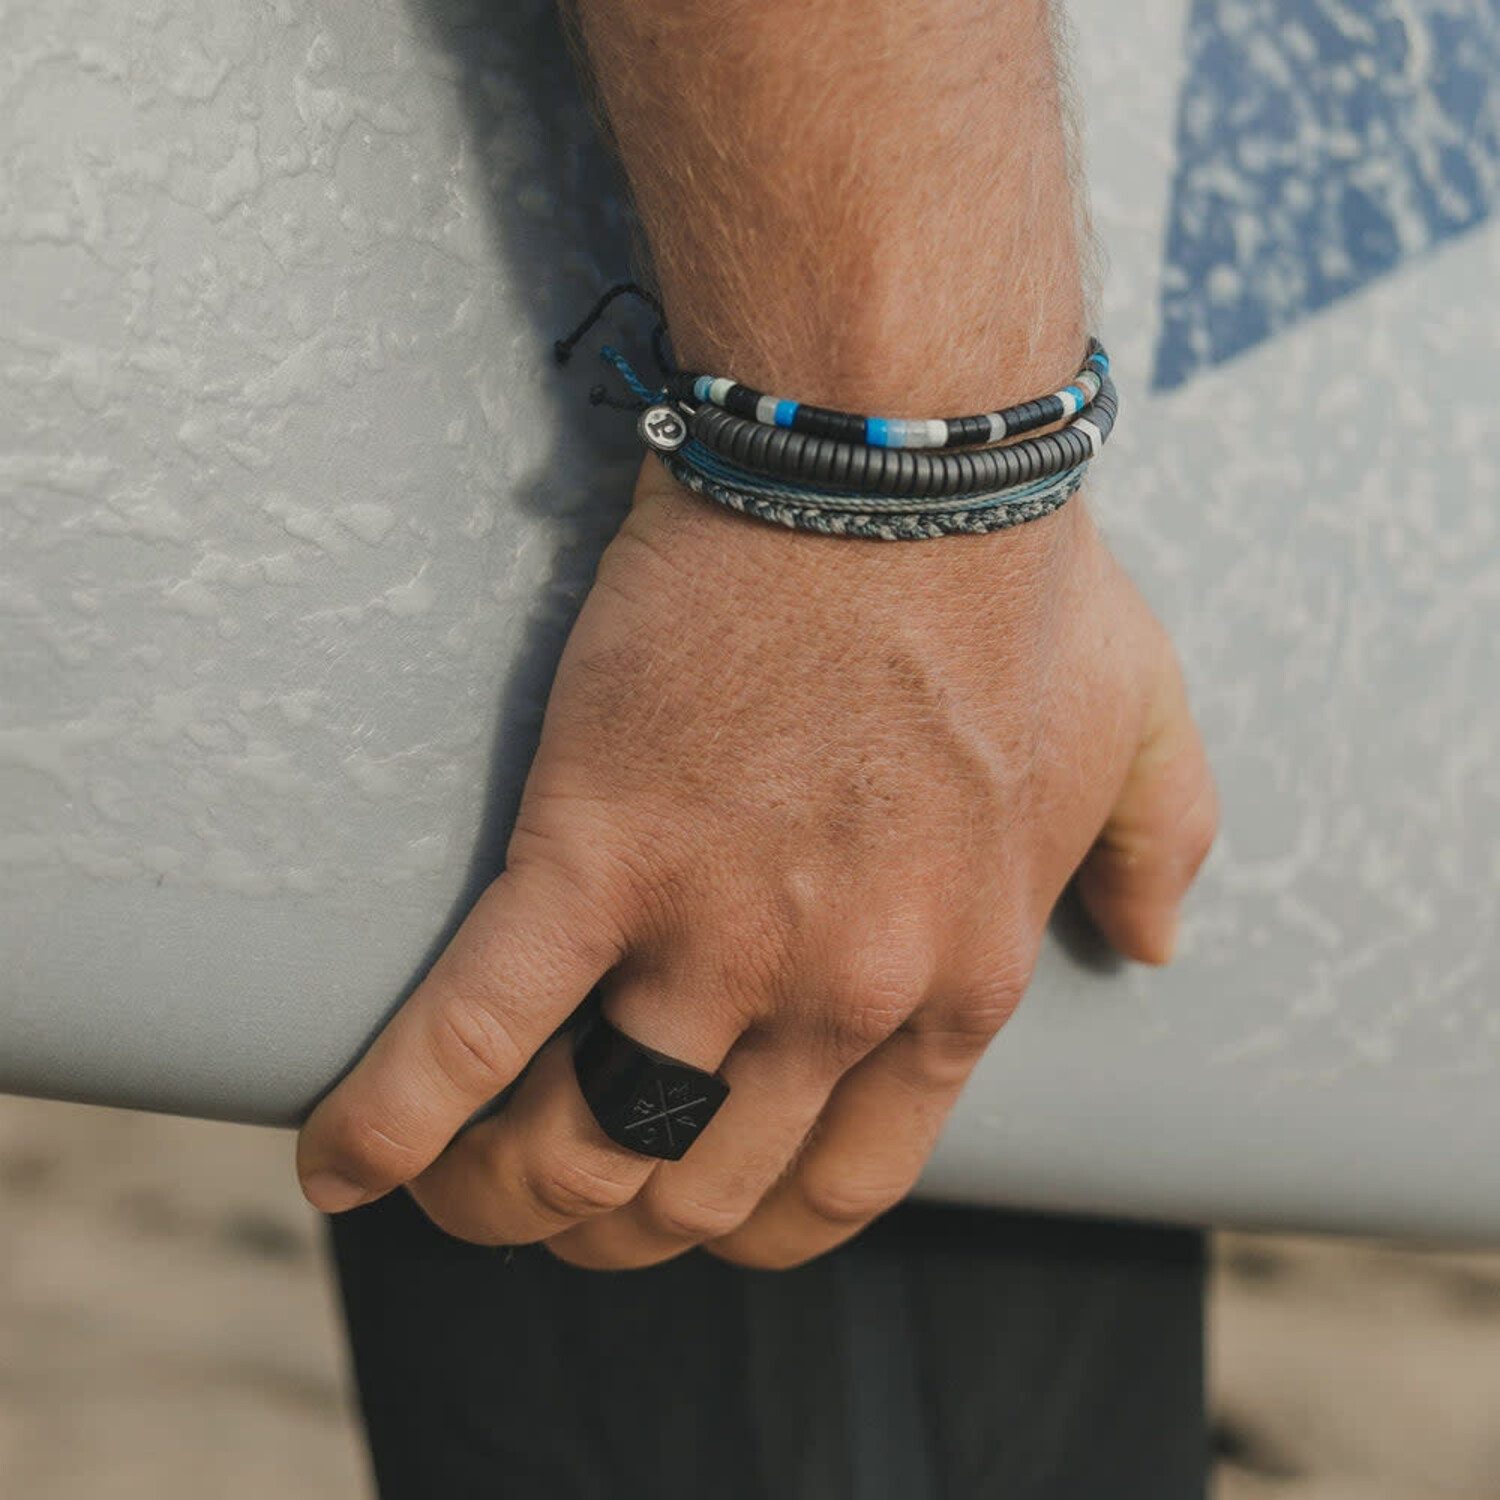 Pura vida mens bracelets, cleaning and maintaining your Pura Vida men's bracelets is essential to ensure they retain their quality, style, and longevity.